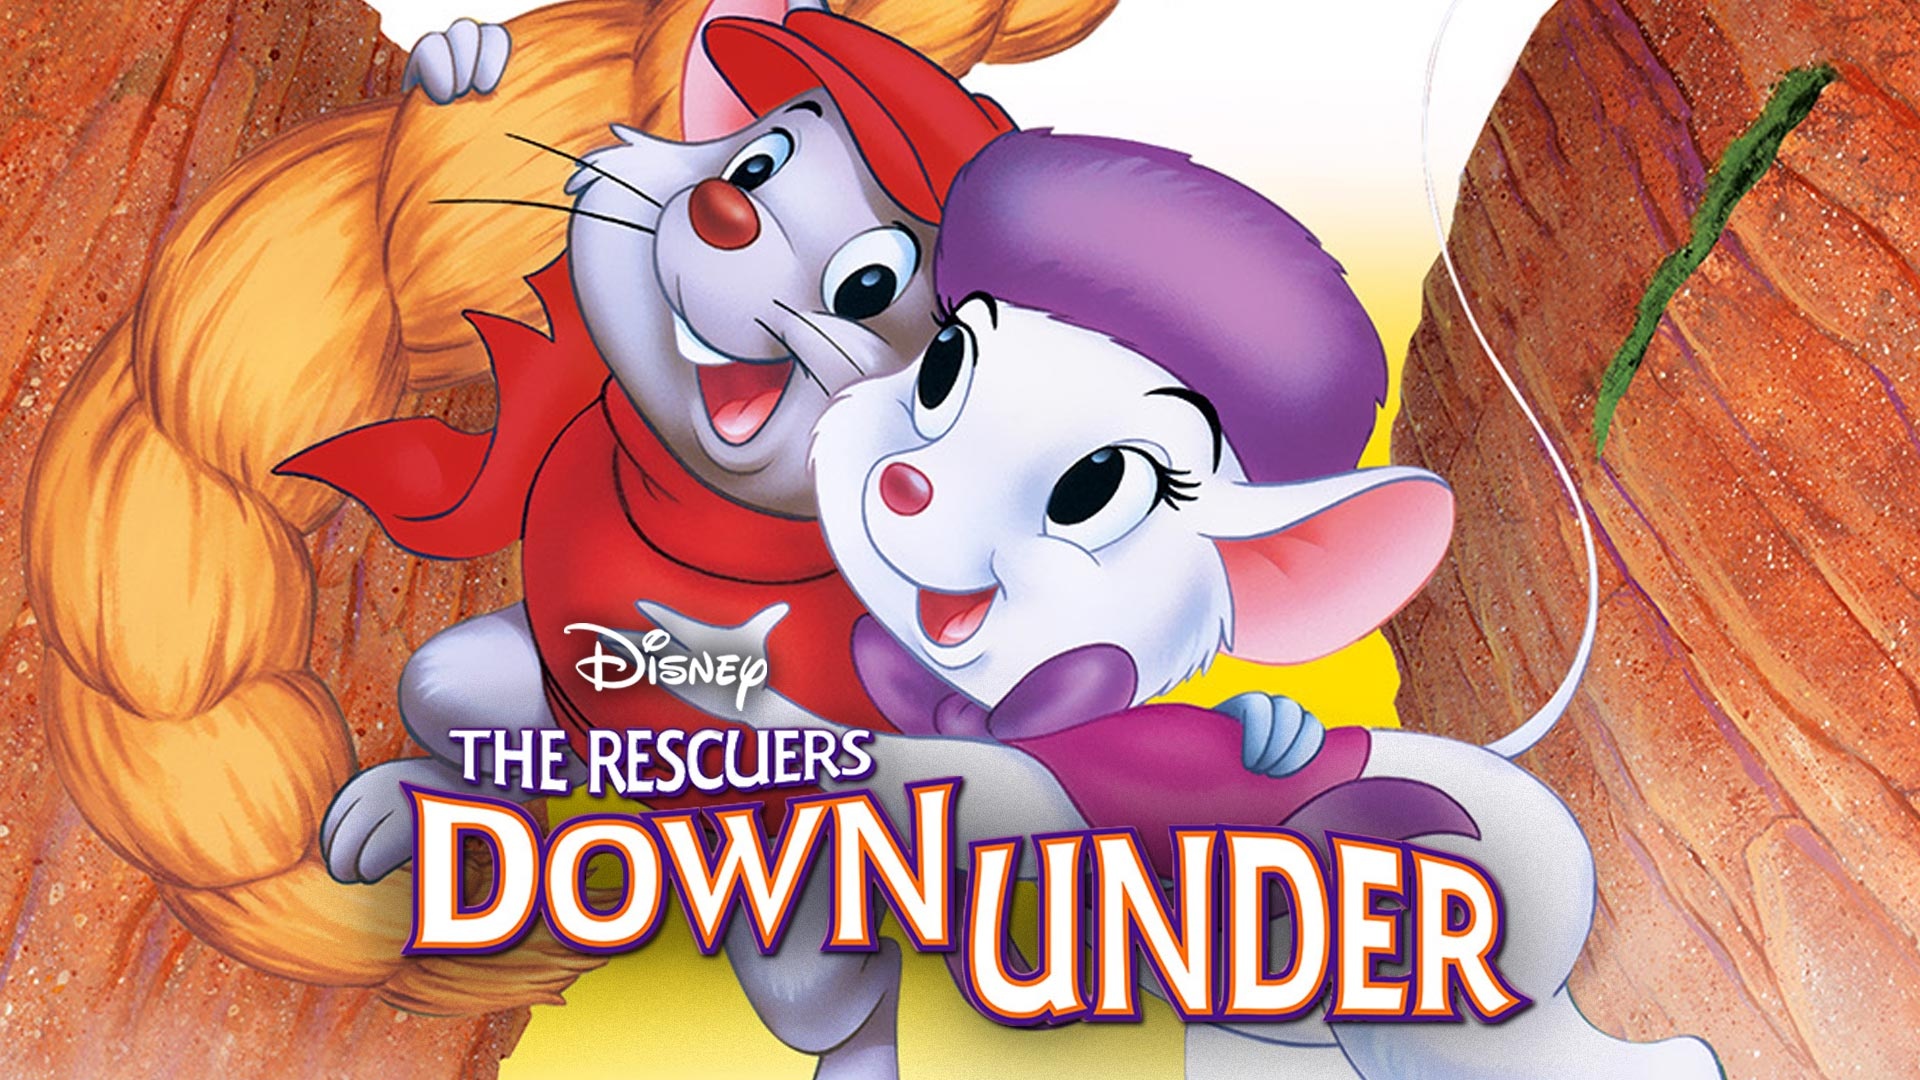 The Rescuers (1977) Wallpapers (22+ images inside)